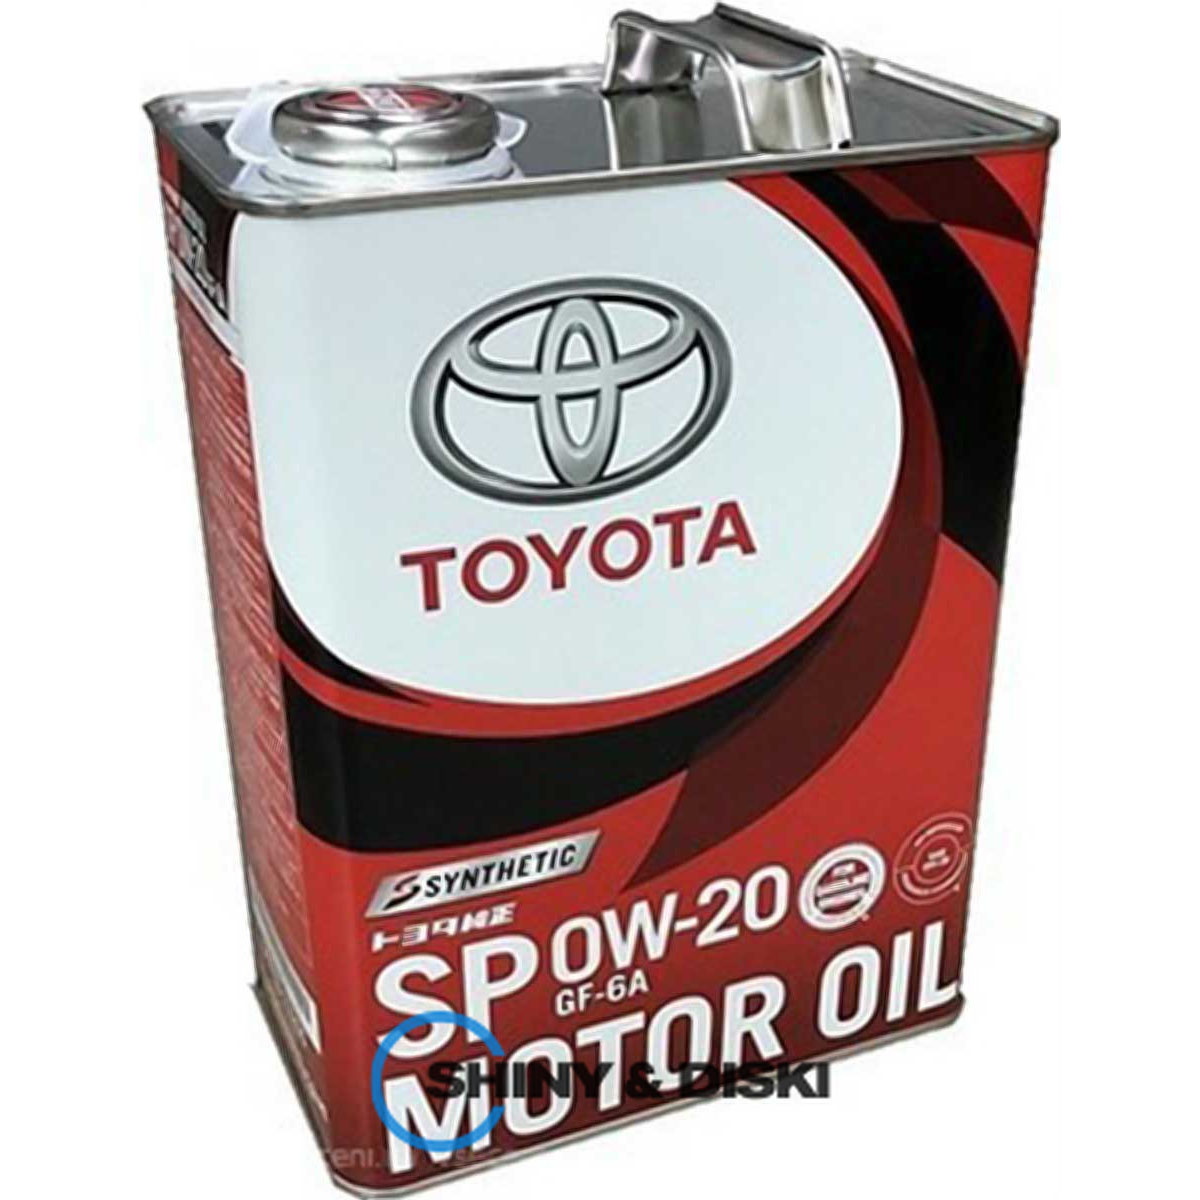 toyota synthetic motor oil 0w-20 sp/gf-6a (1л)